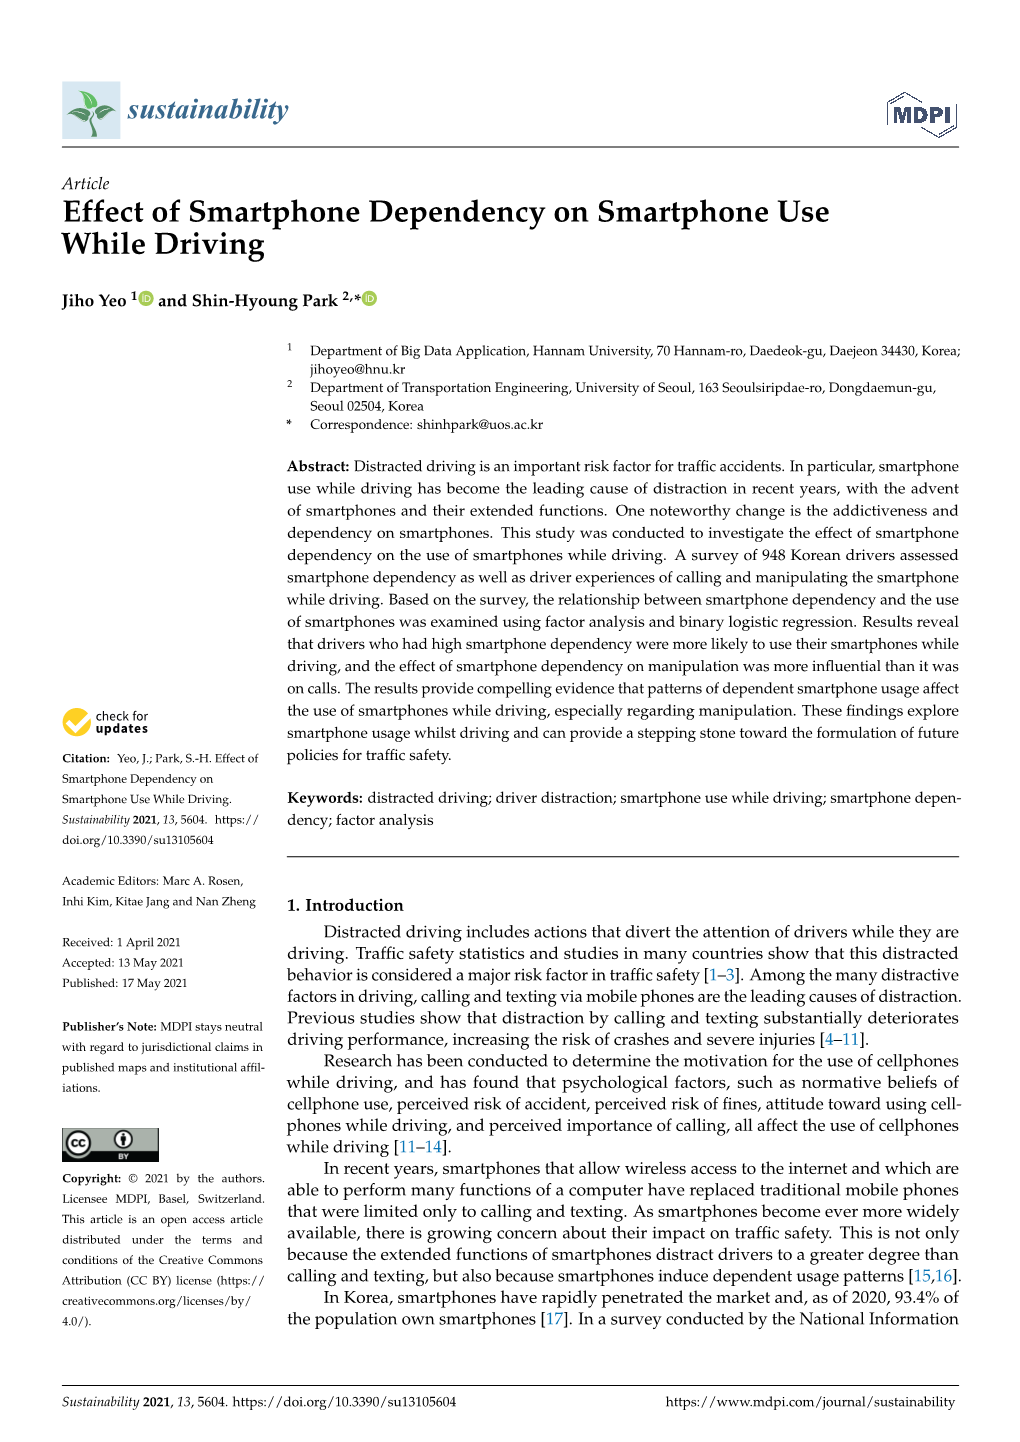 Effect of Smartphone Dependency on Smartphone Use While Driving